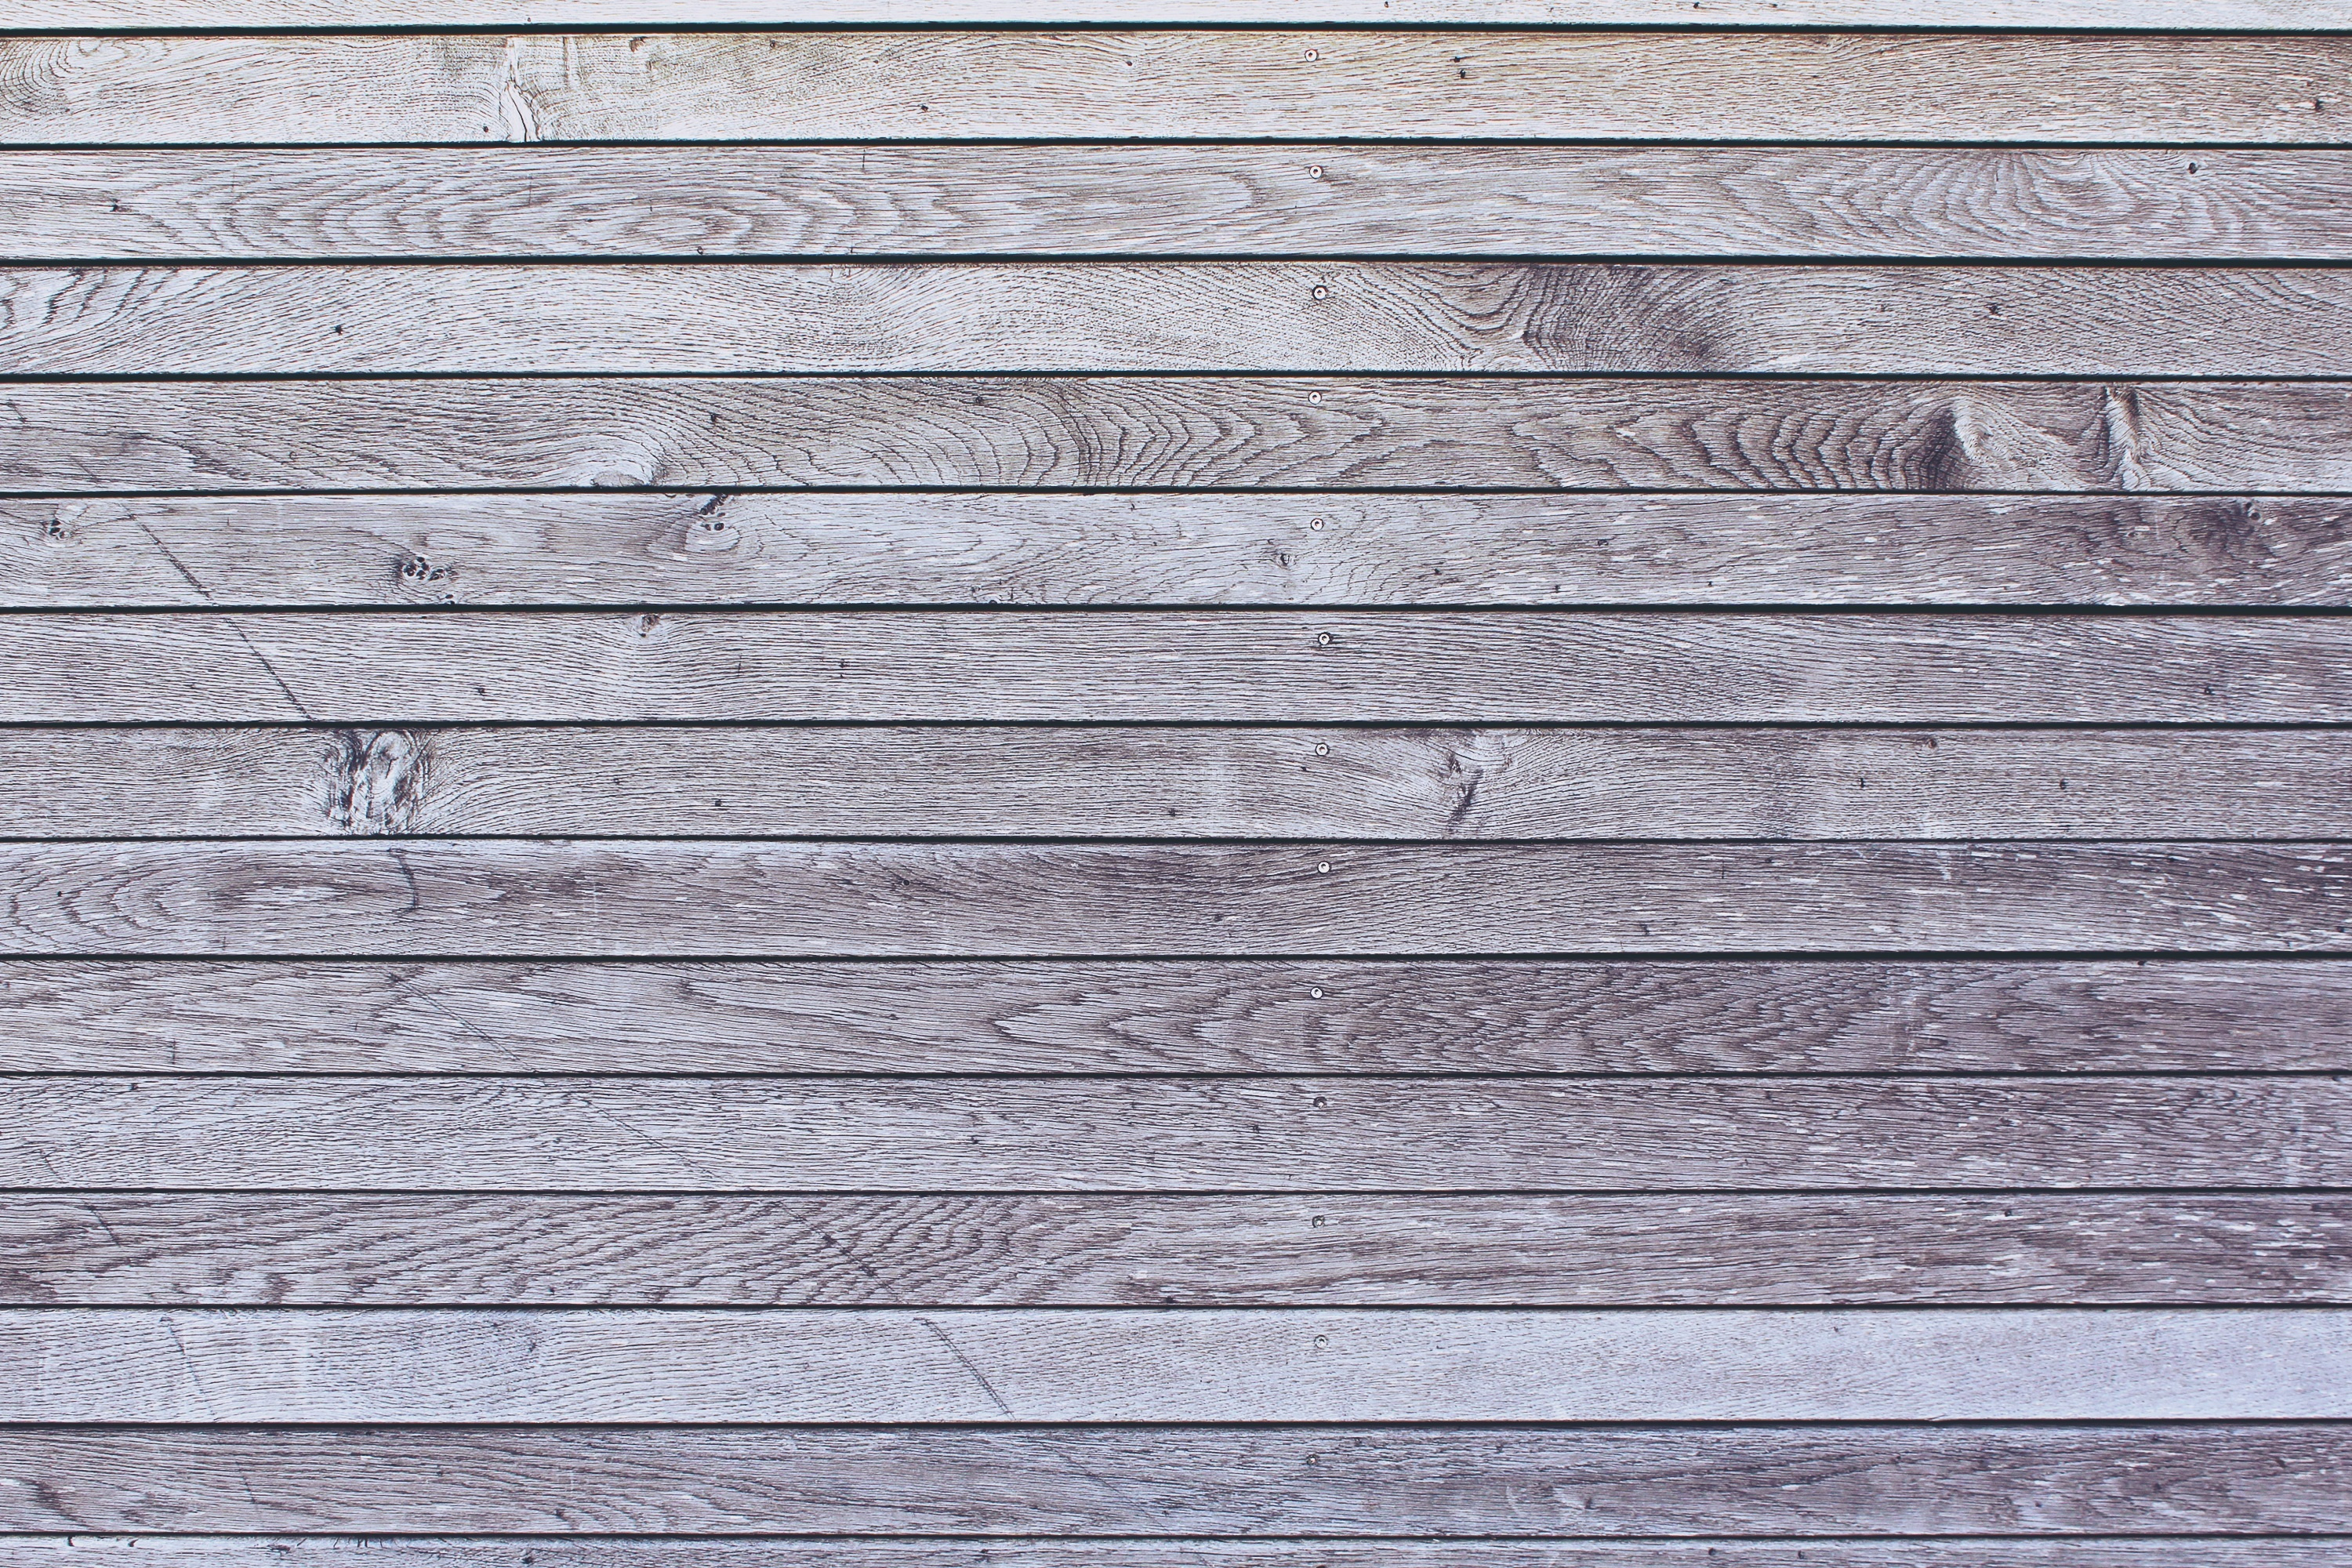 Background, Wood, Wooden Wall, Wooden Boards